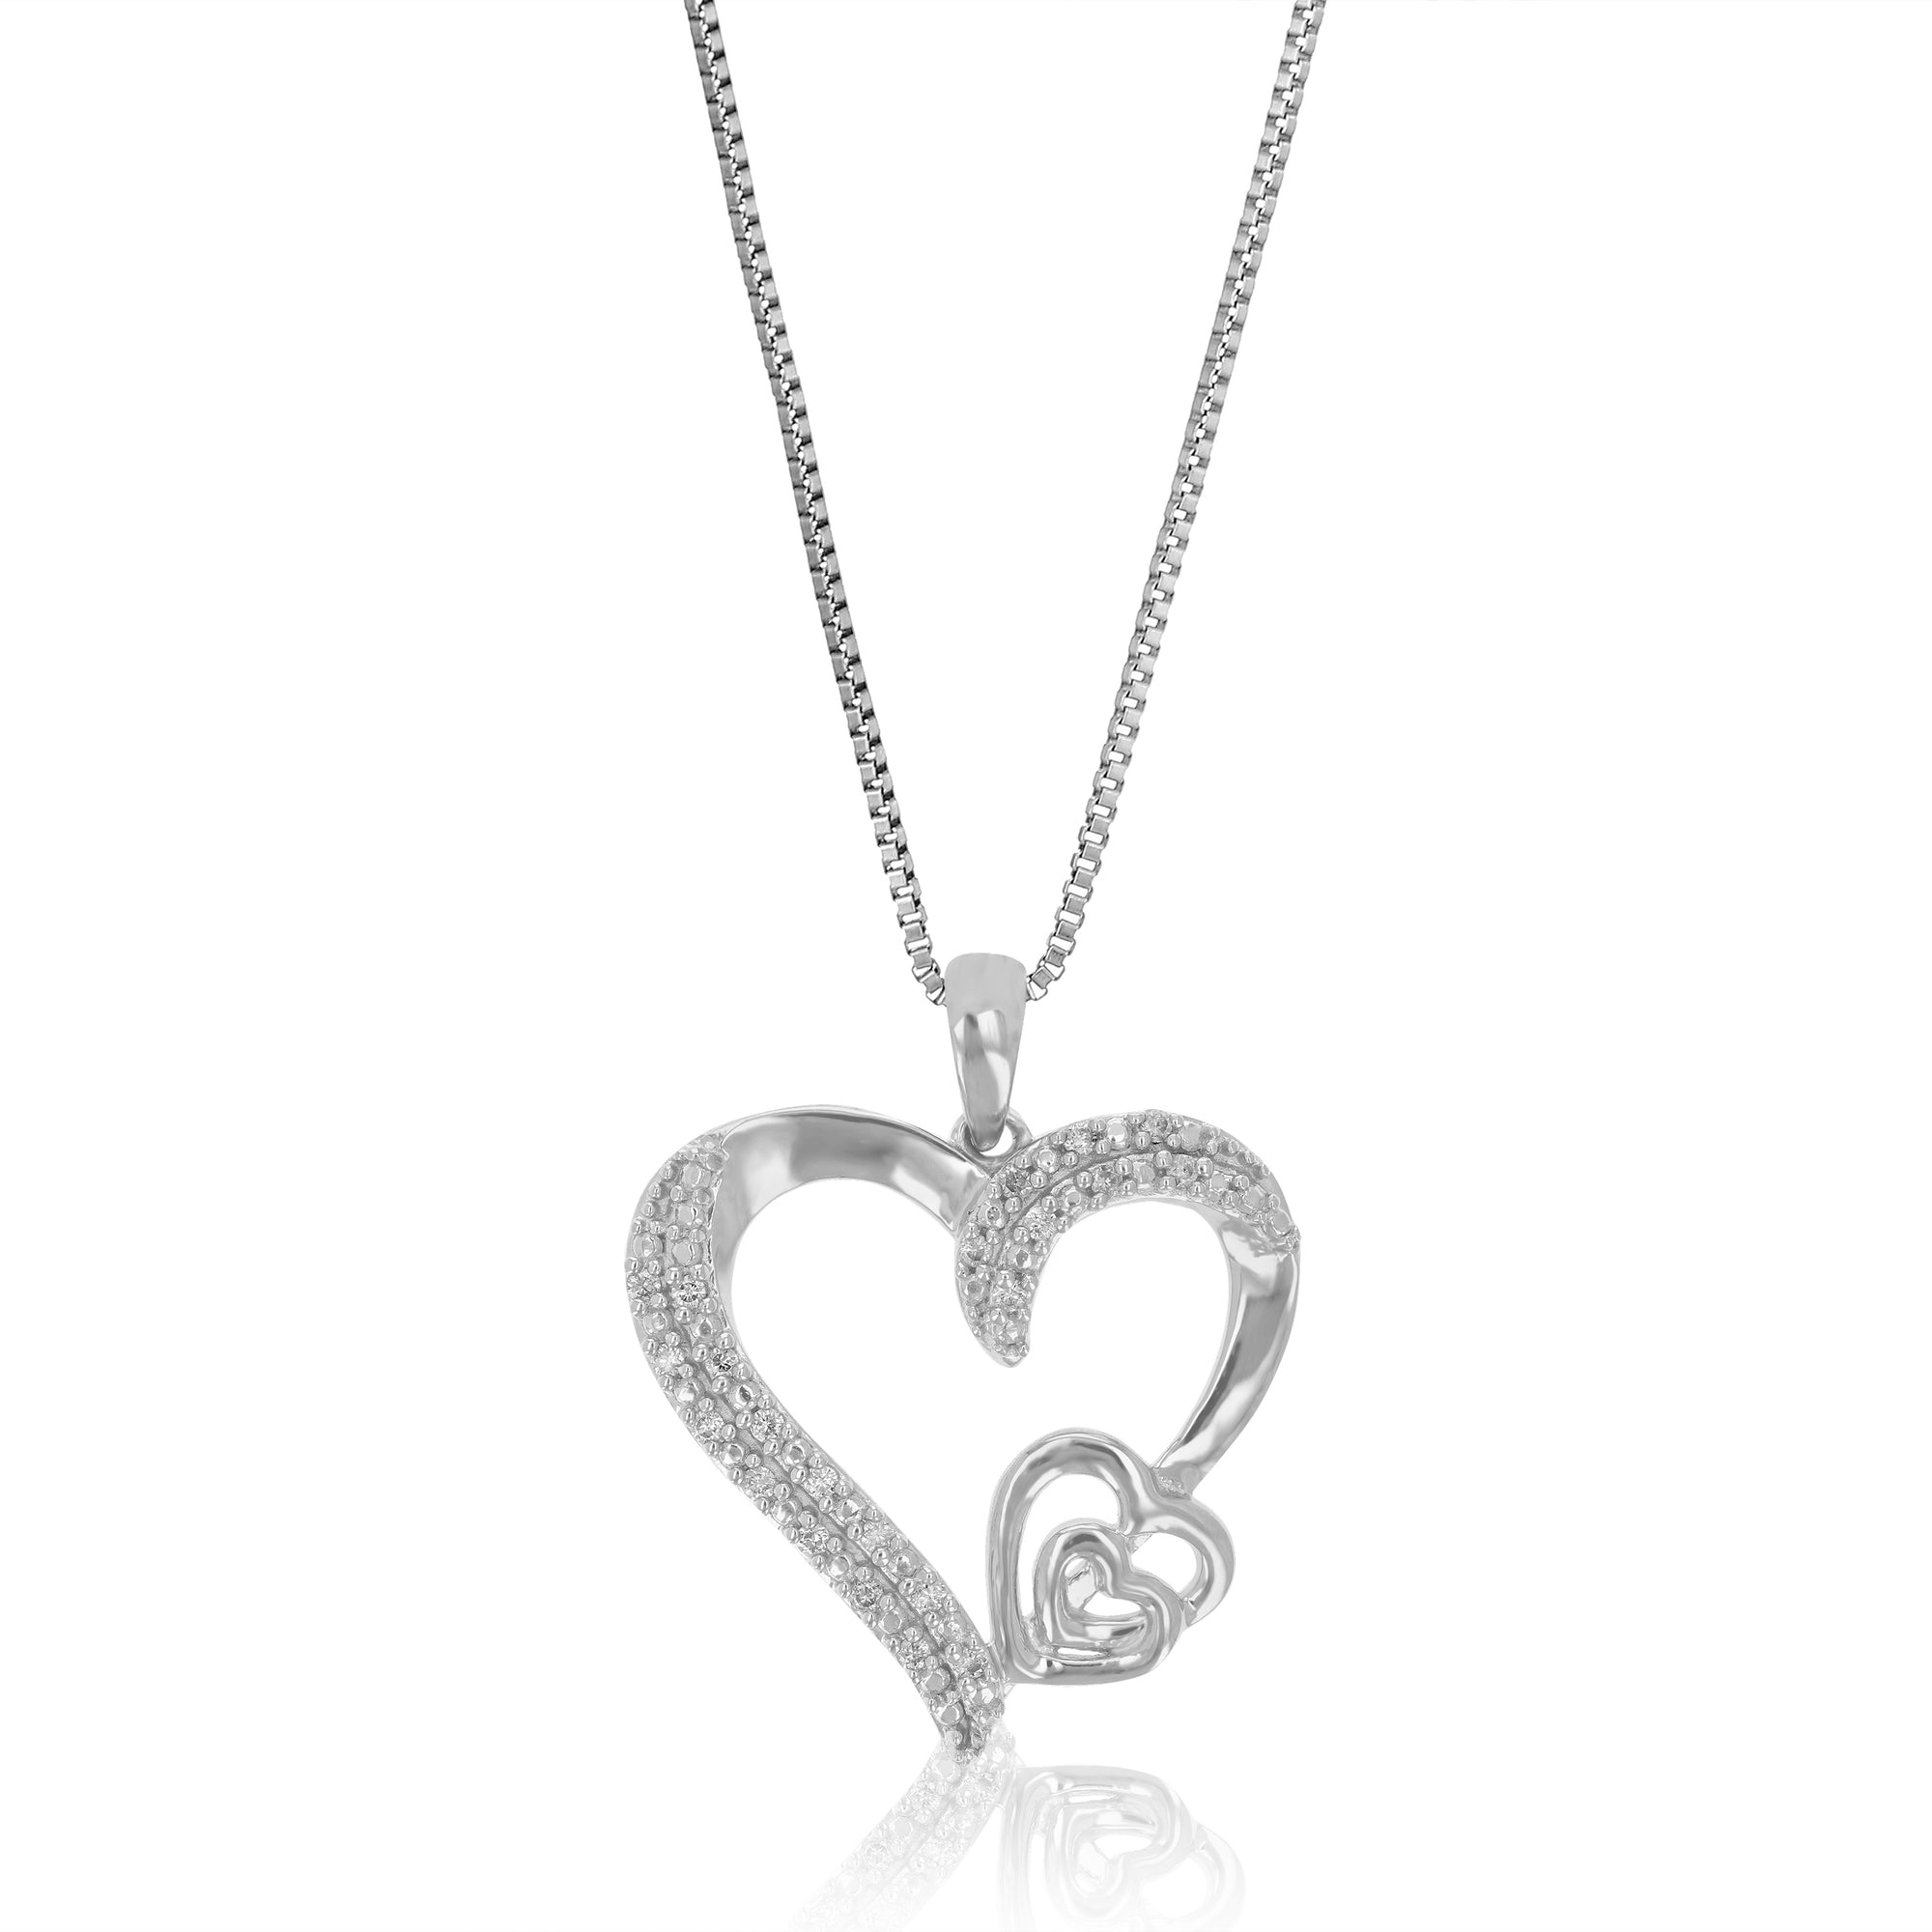 1/10 cttw Diamond Pendant Necklace for Women, Lab Grown Diamond Heart Pendant Necklace in .925 Sterling Silver with Chain, Size 1 Inch